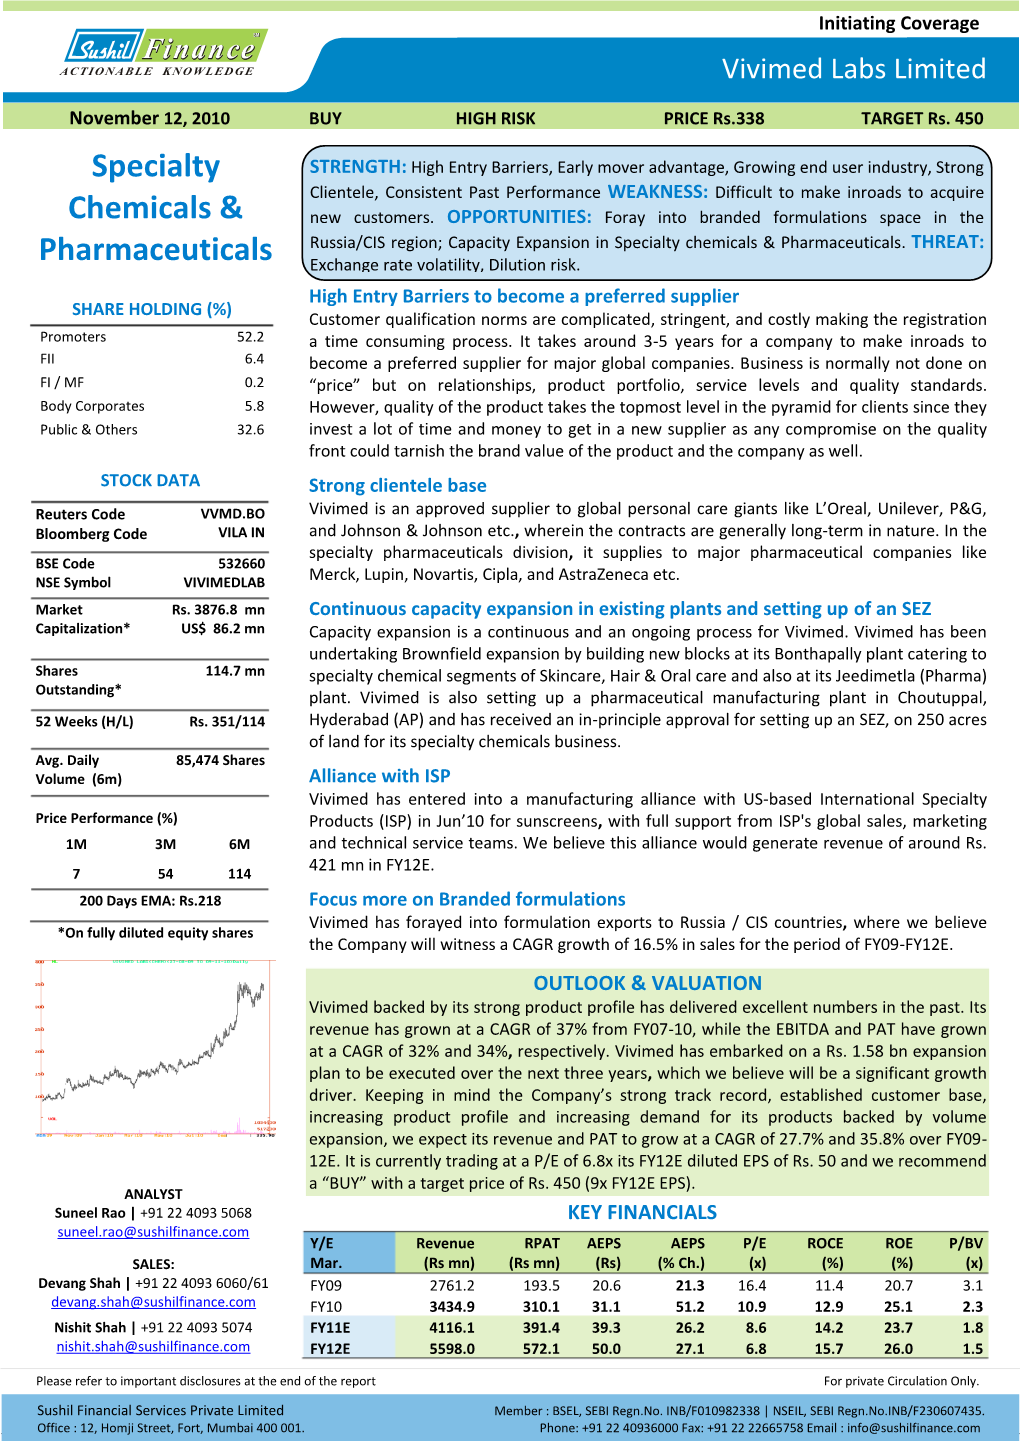 Specialty Chemicals & Pharmaceuticals